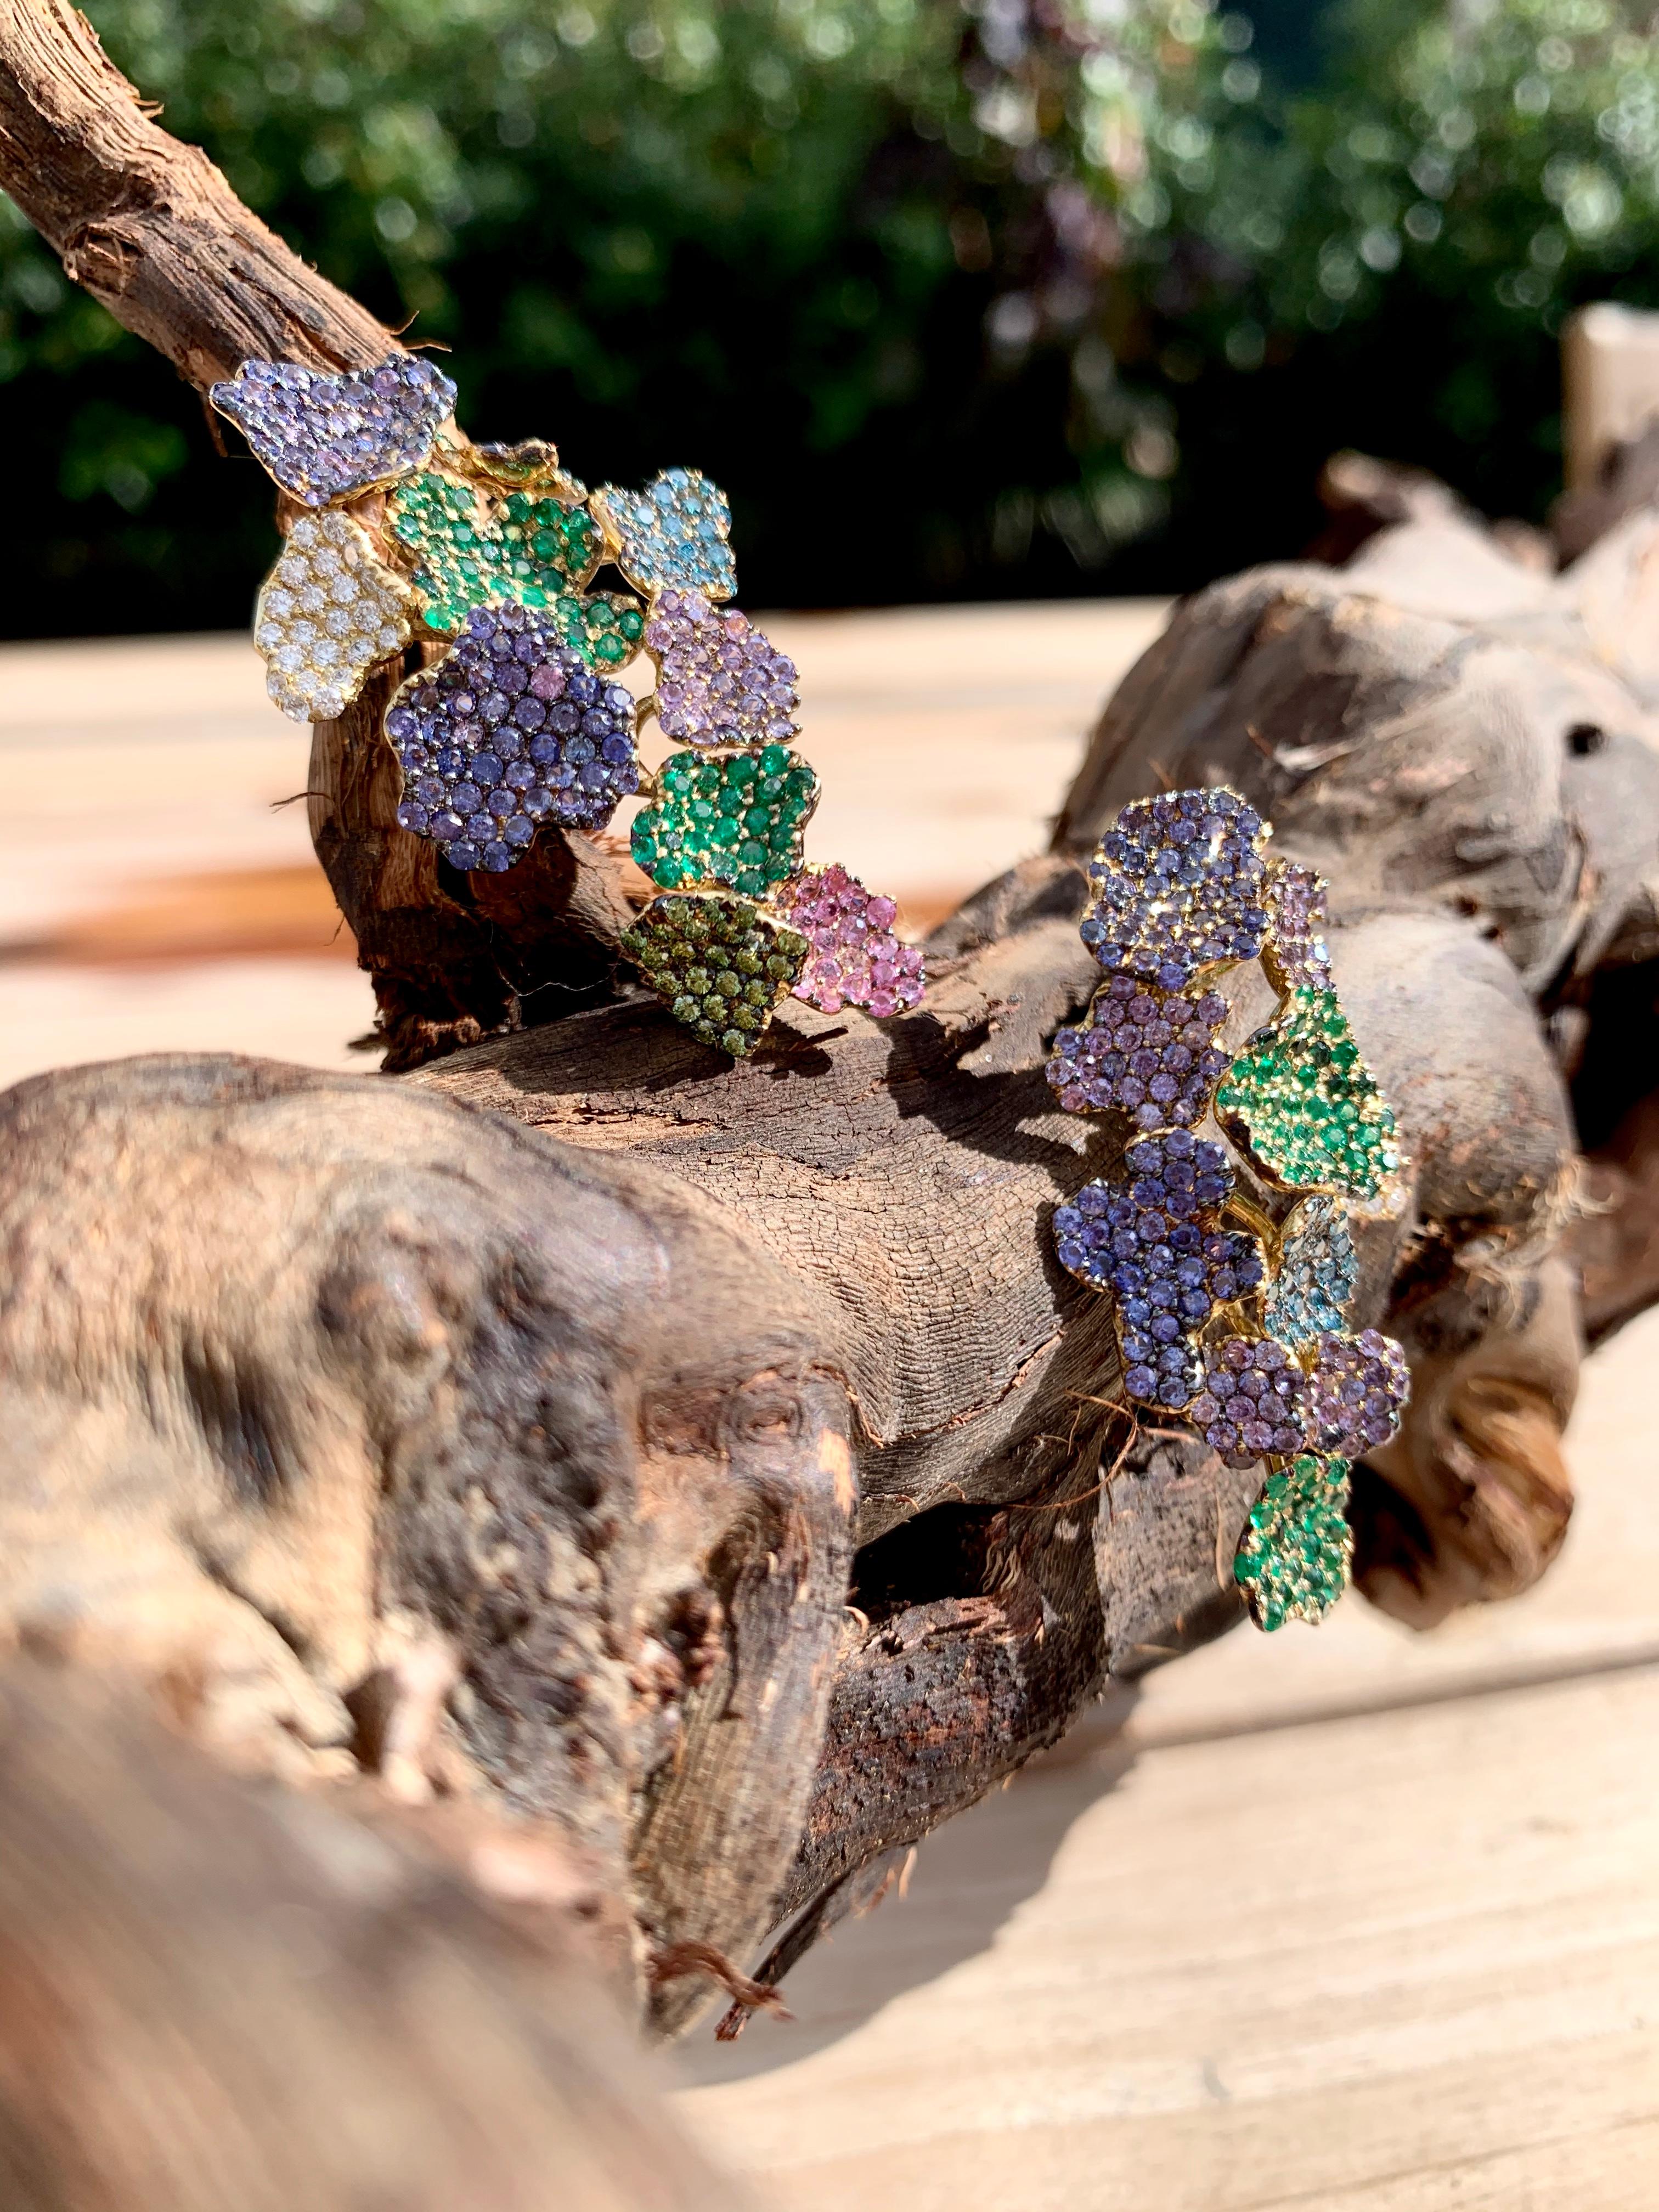 Rosior by Manuel Rosas Contemporary Long Earrings featuring different flowers, each one handmade in 19.2 Karat Yellow Gold and Set with:
- 253 Purple Sapphires with 4,21 ct,
- 22 Pink Sapphires with 0,40 ct,
- 126 Emeralds with 1,63 ct,
- 49 White